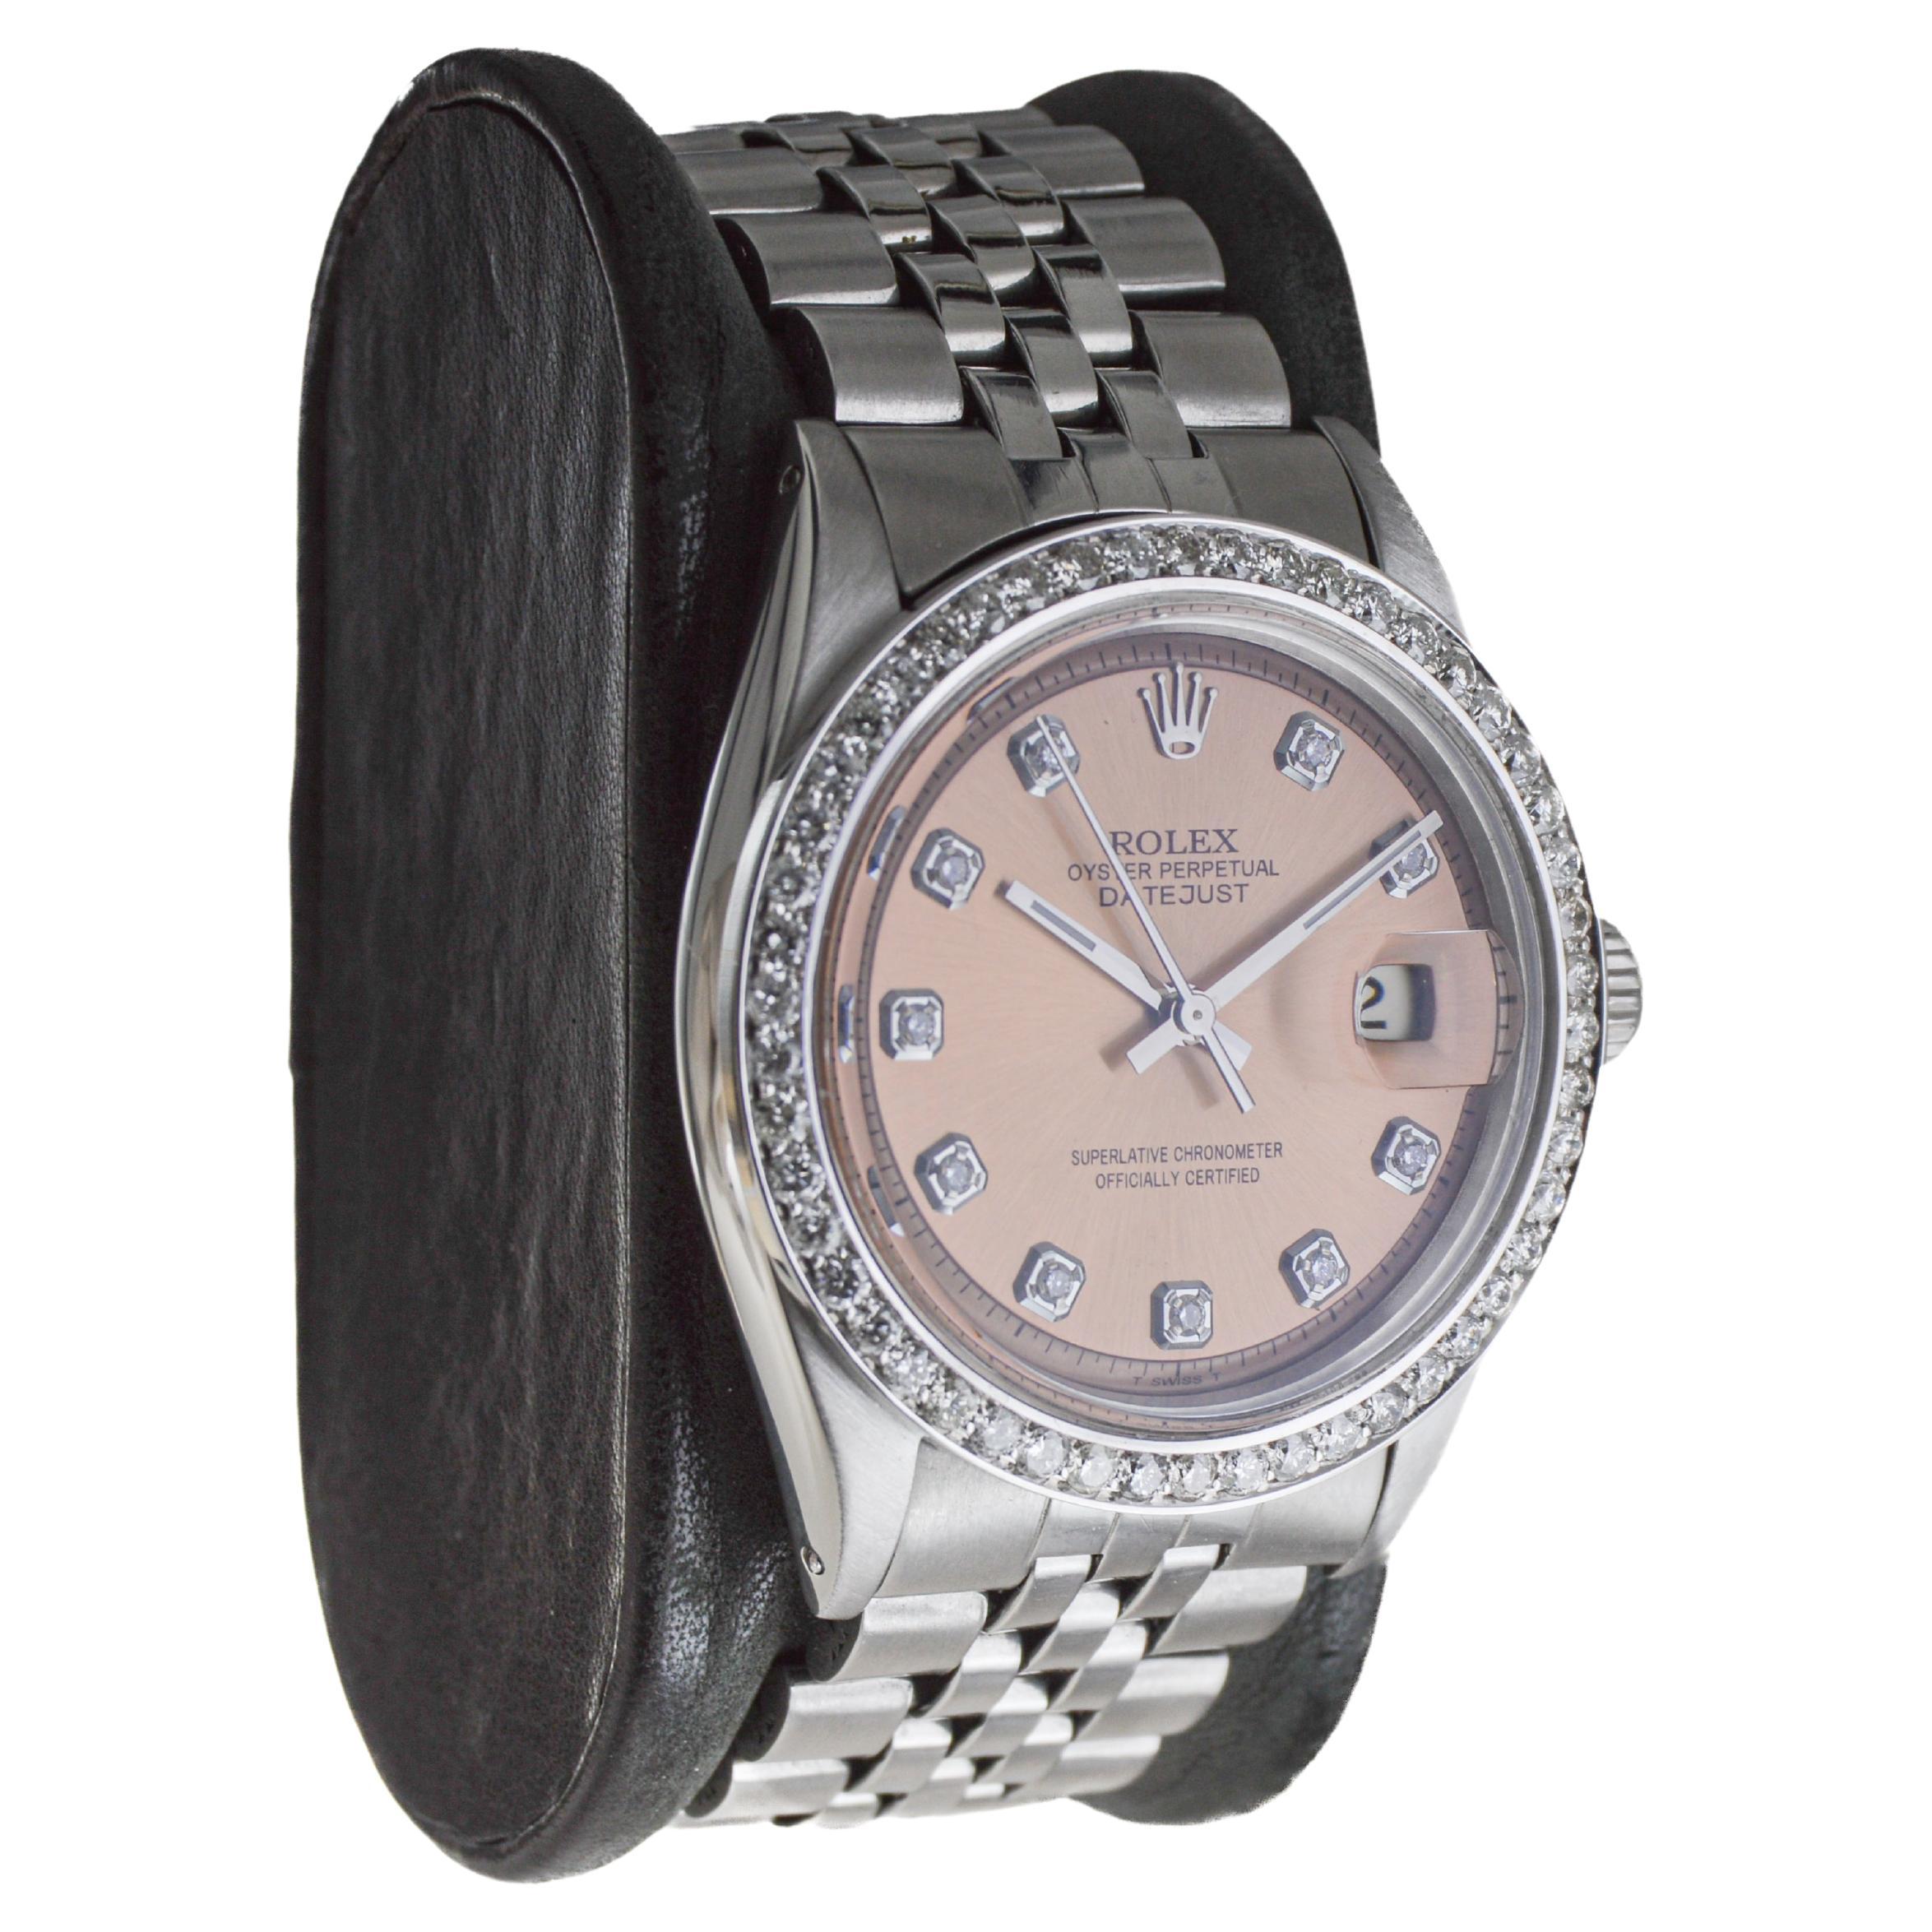 FACTORY / HOUSE: Rolex Watch Company
STYLE / REFERENCE: Datejust / Reference 1603
METAL / MATERIAL: Stainless Steel
CIRCA / YEAR: 1960's
DIMENSIONS / SIZE:  Length 44mm X Diameter 36mm
MOVEMENT / CALIBER: Perpetual Winding / 26 Jewels / Caliber